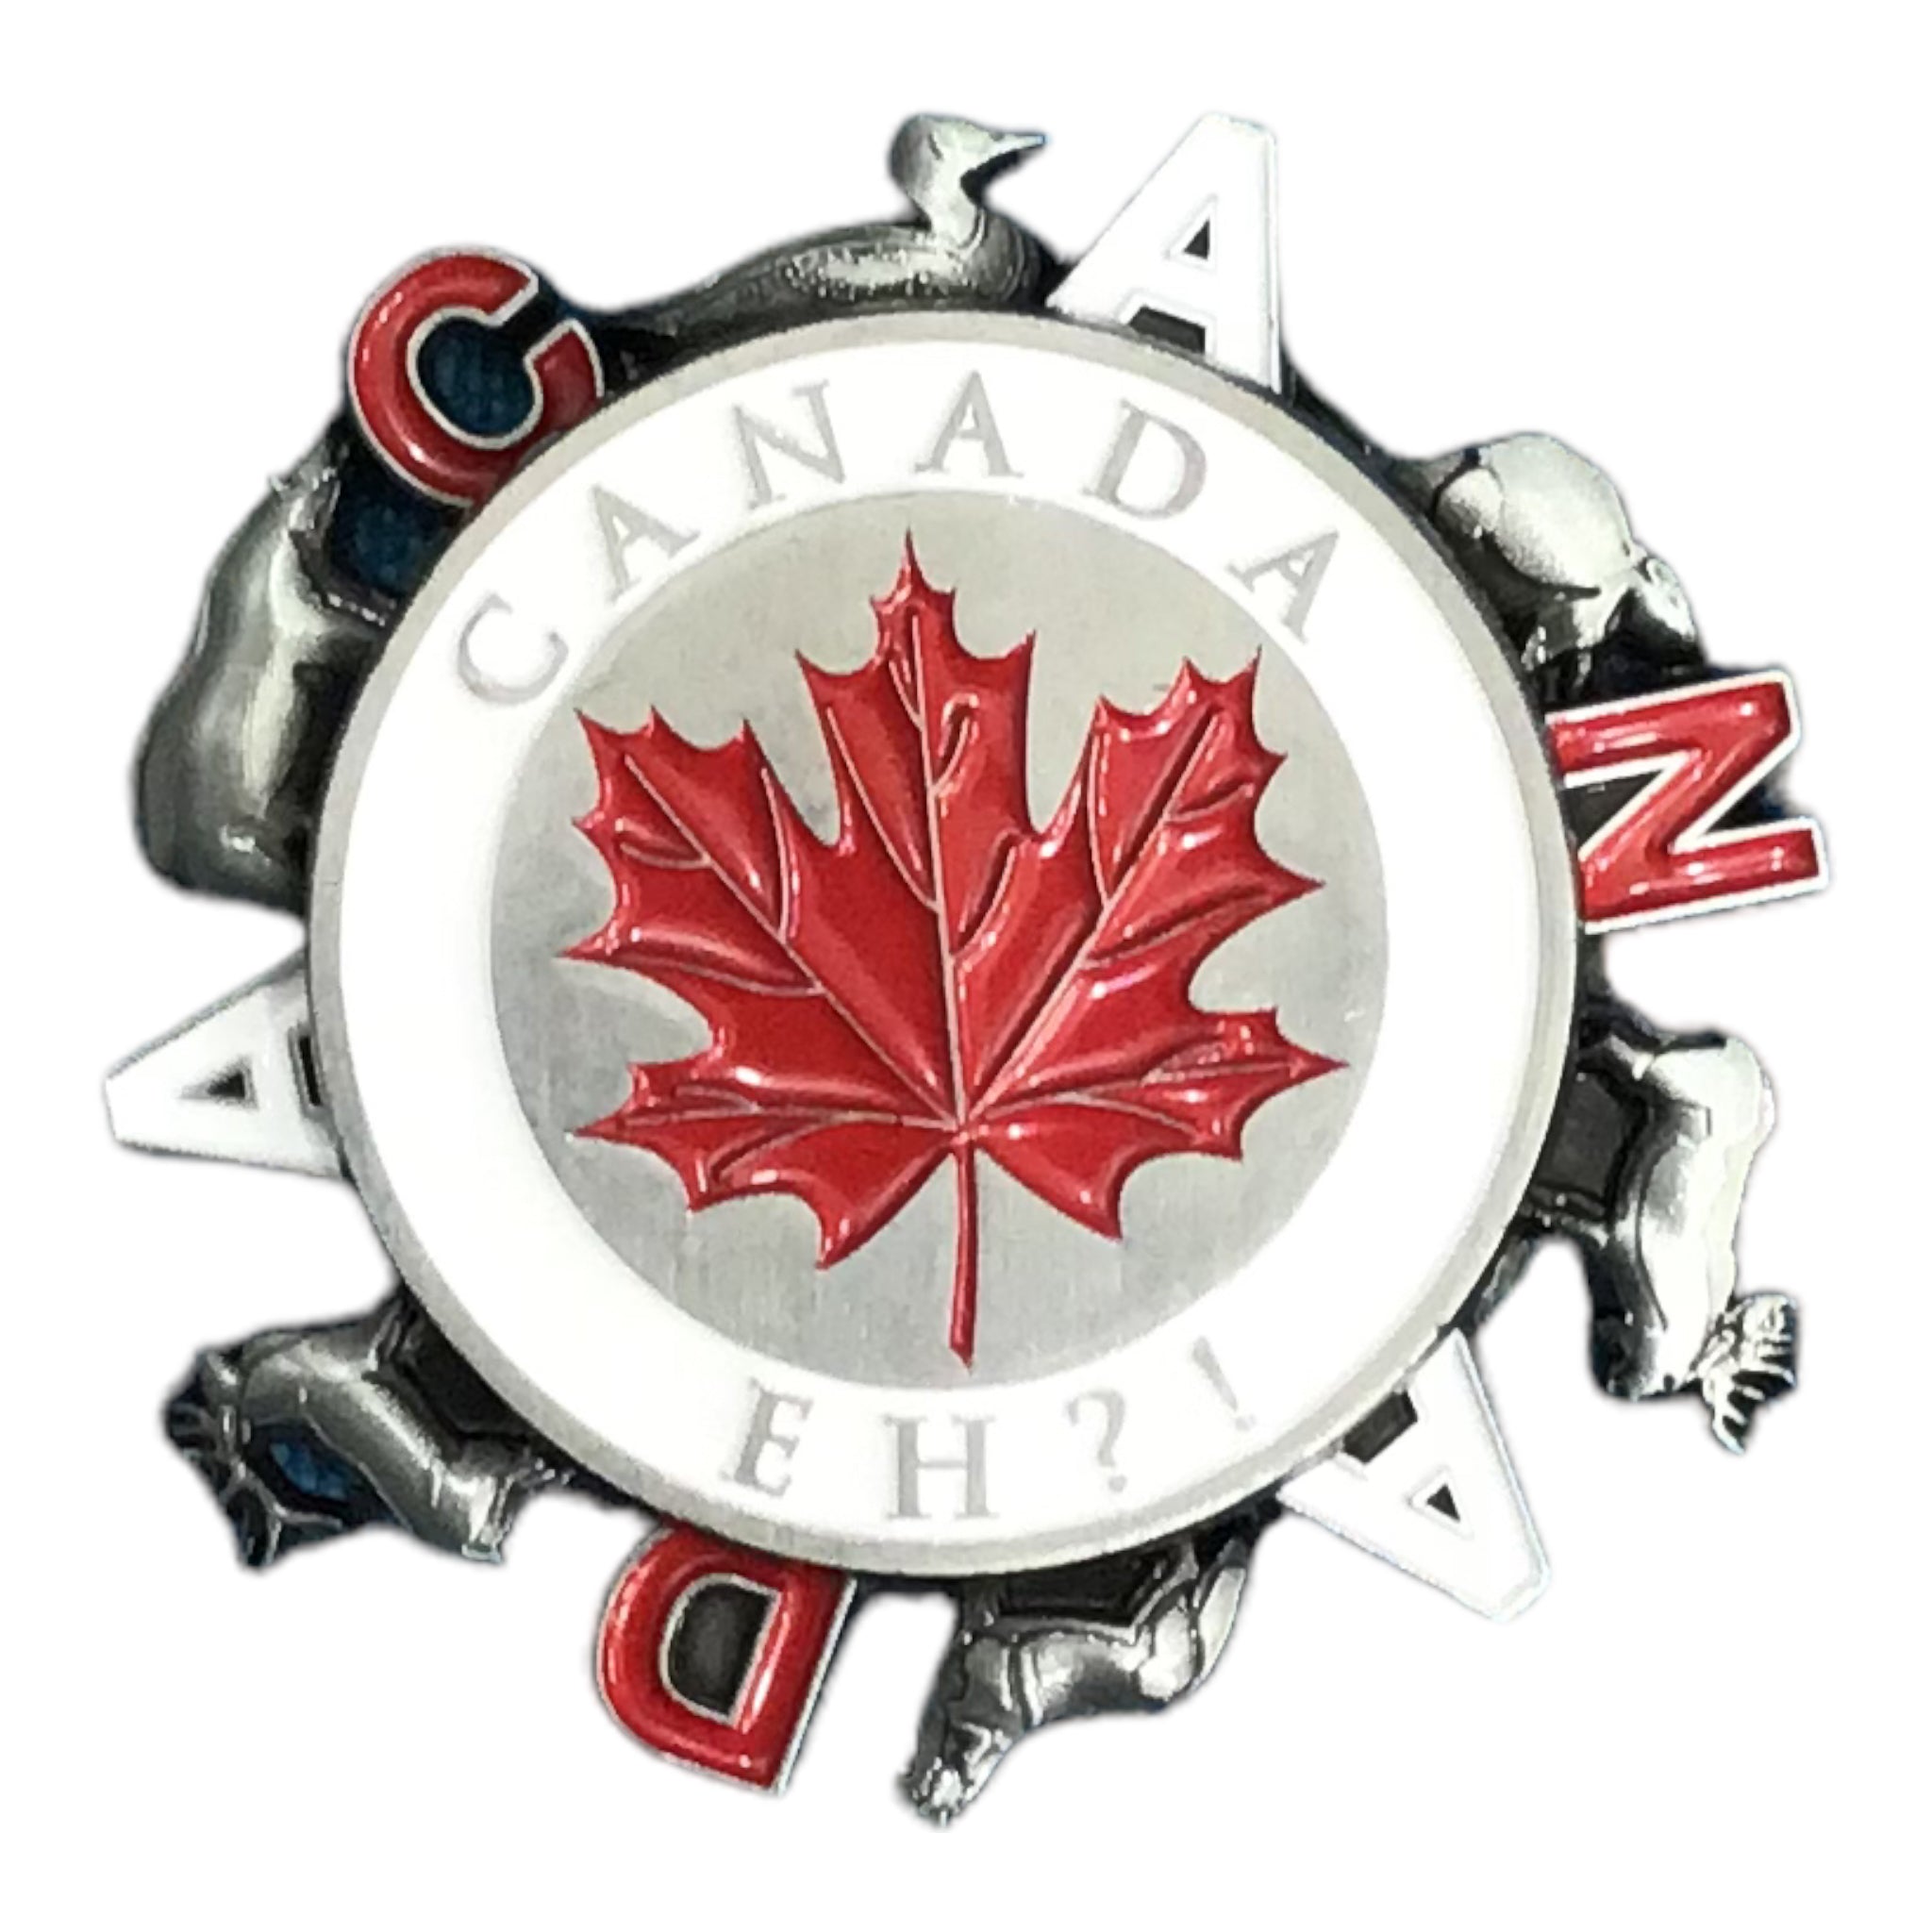 CANADA SPINNER MAGNETS | It Spins - It Swirls - It Makes You Twirl!